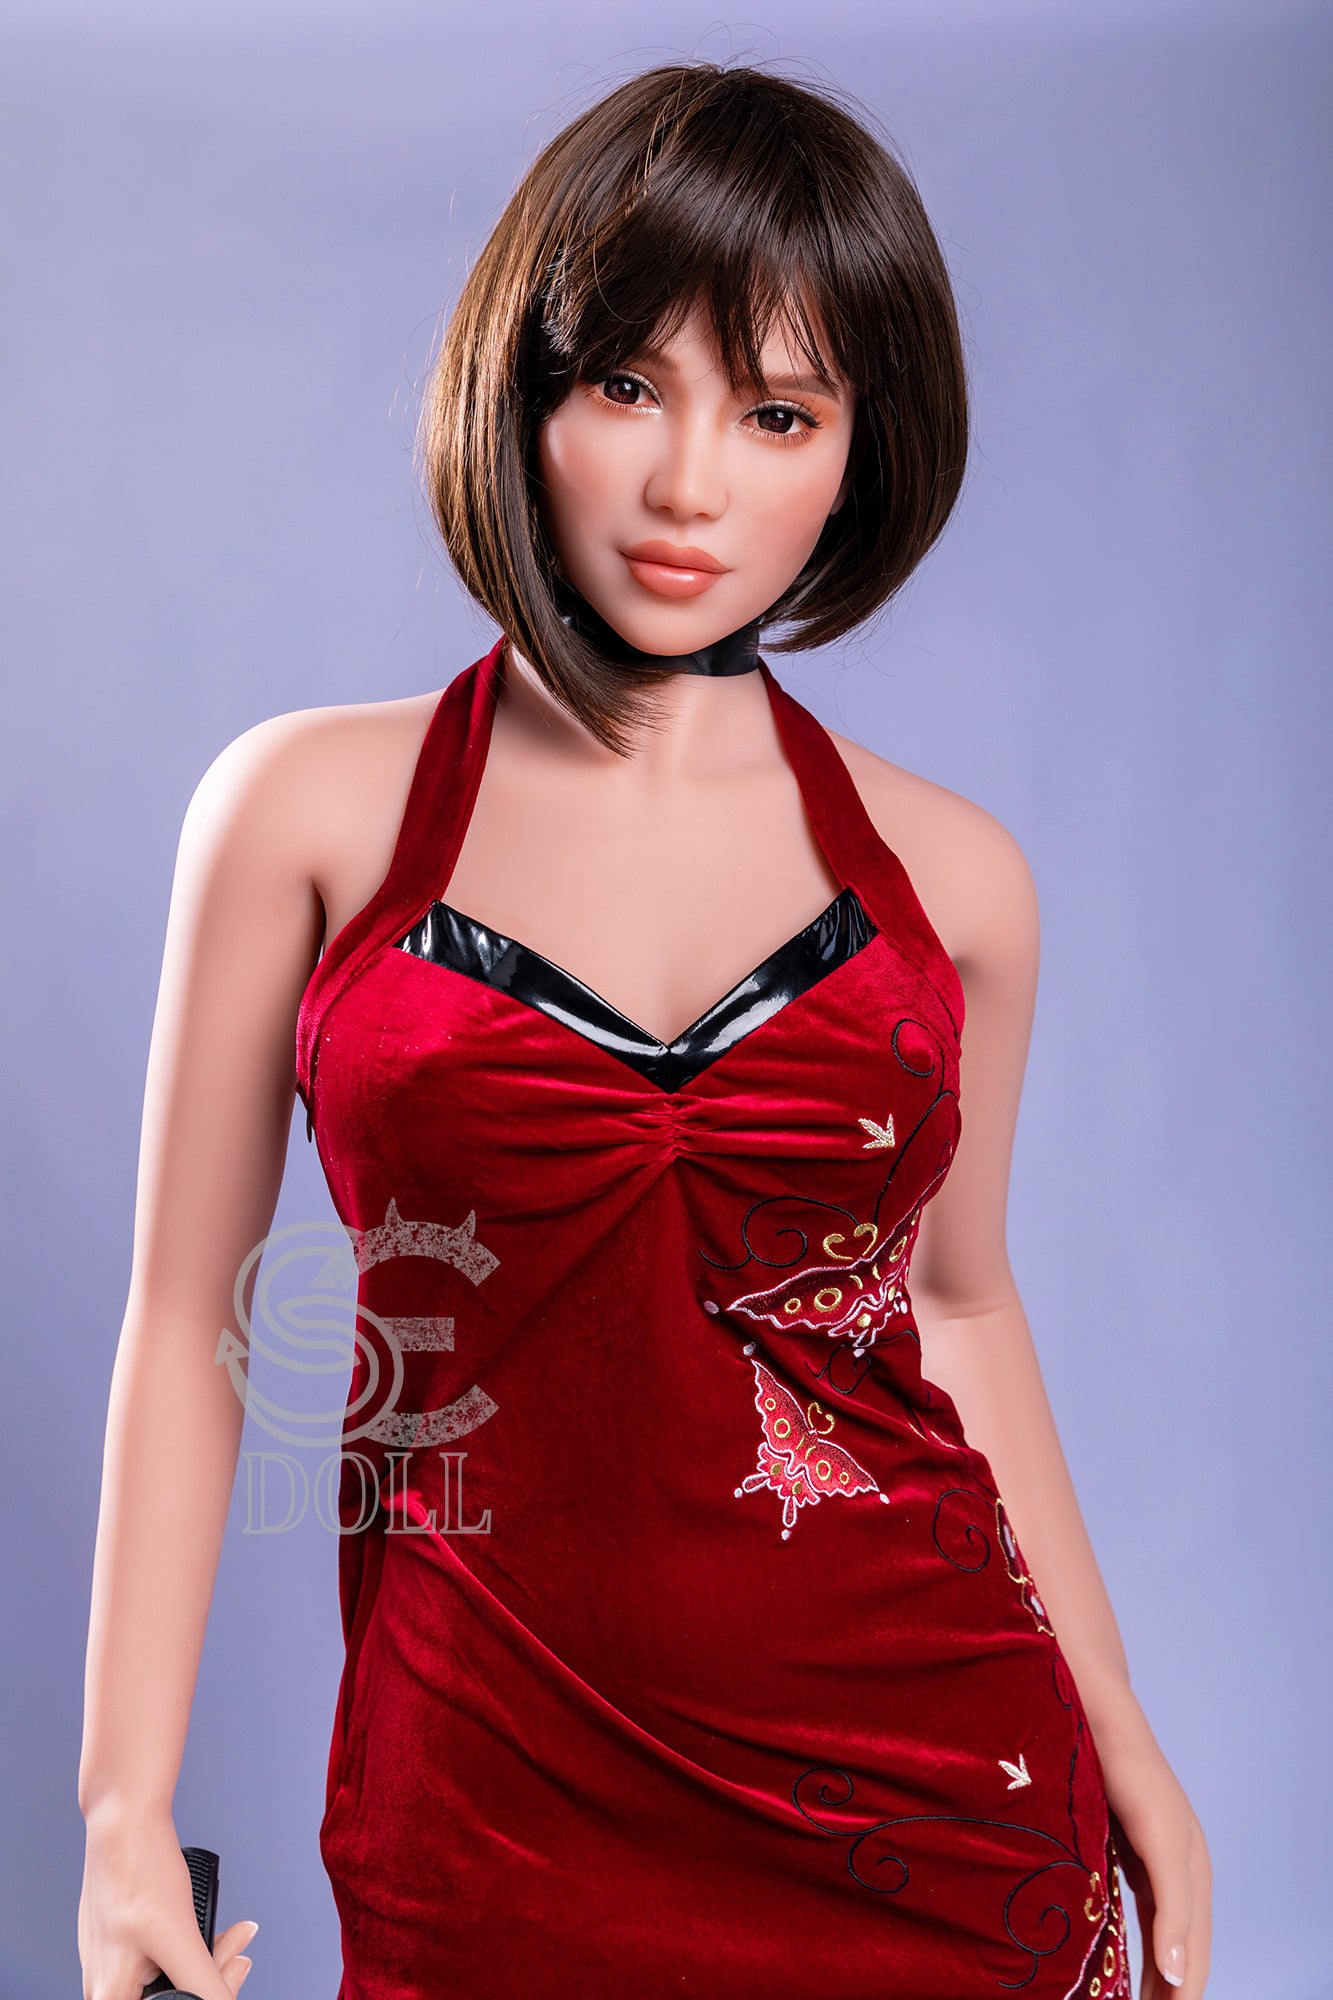 SEDOLL 163 cm E TPE - Nidalee | Buy Sex Dolls at DOLLS ACTUALLY